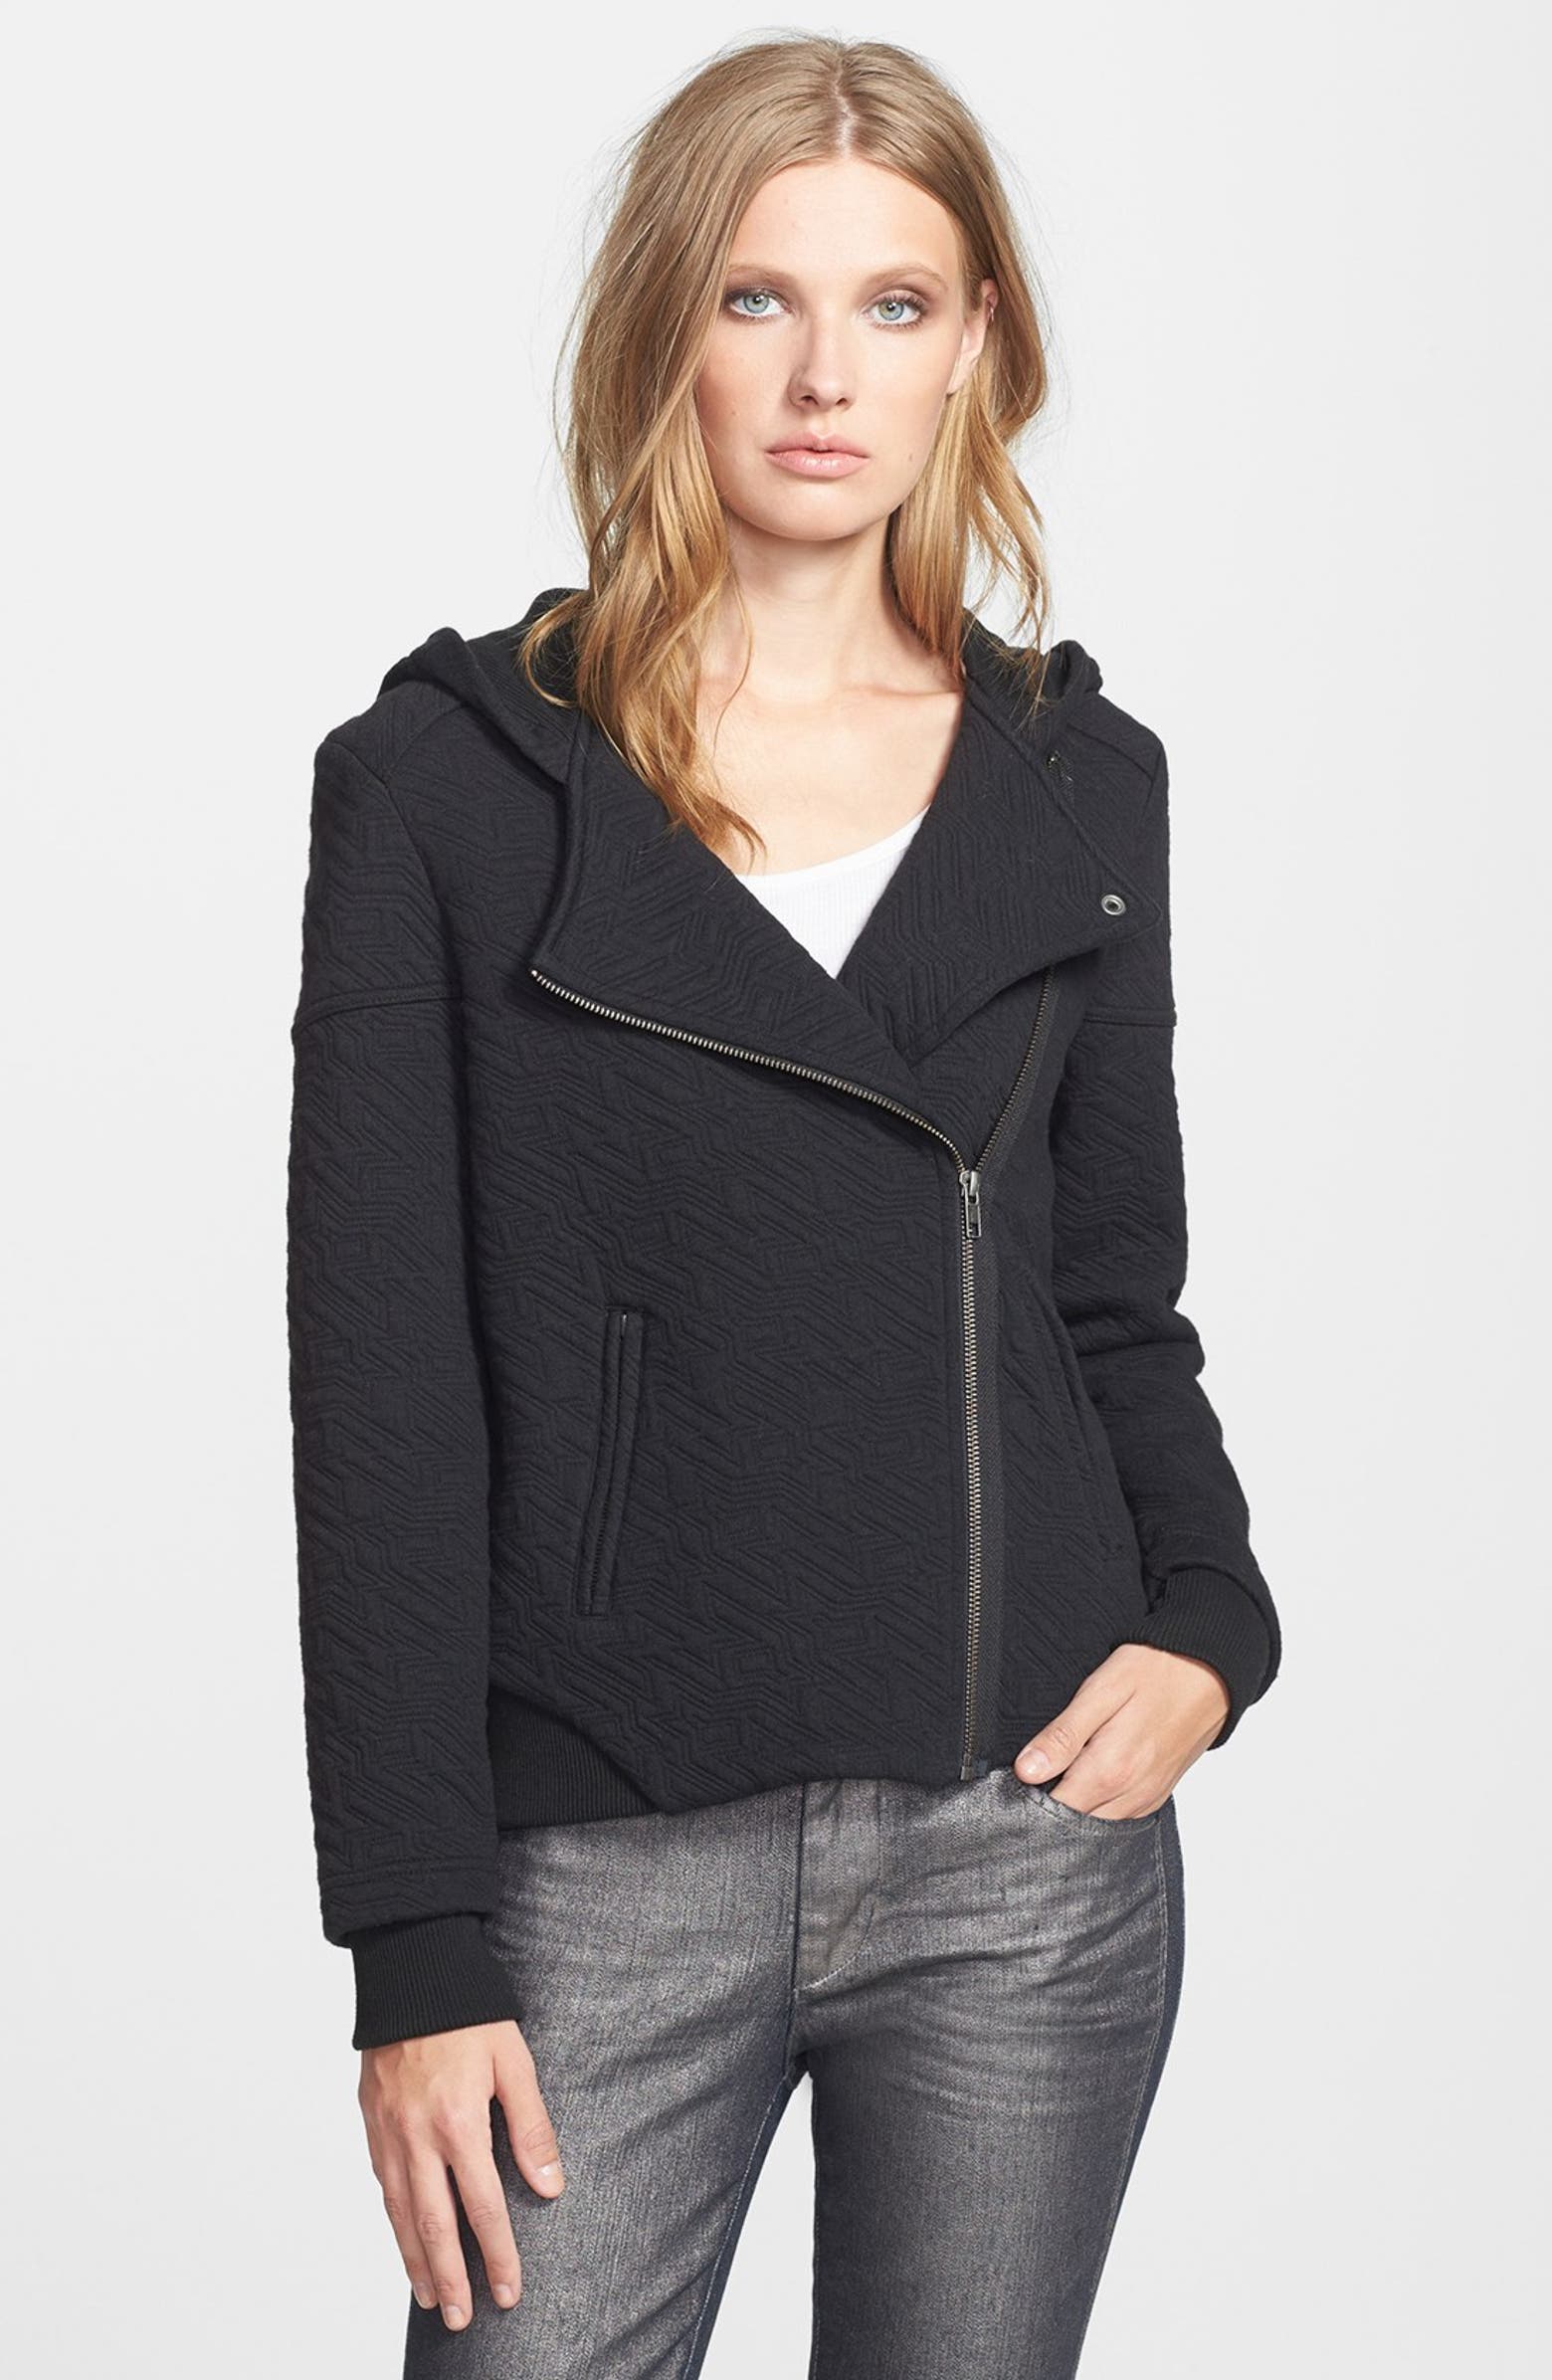 MARC BY MARC JACOBS 'Cleo' Quilted Knit Jacket | Nordstrom